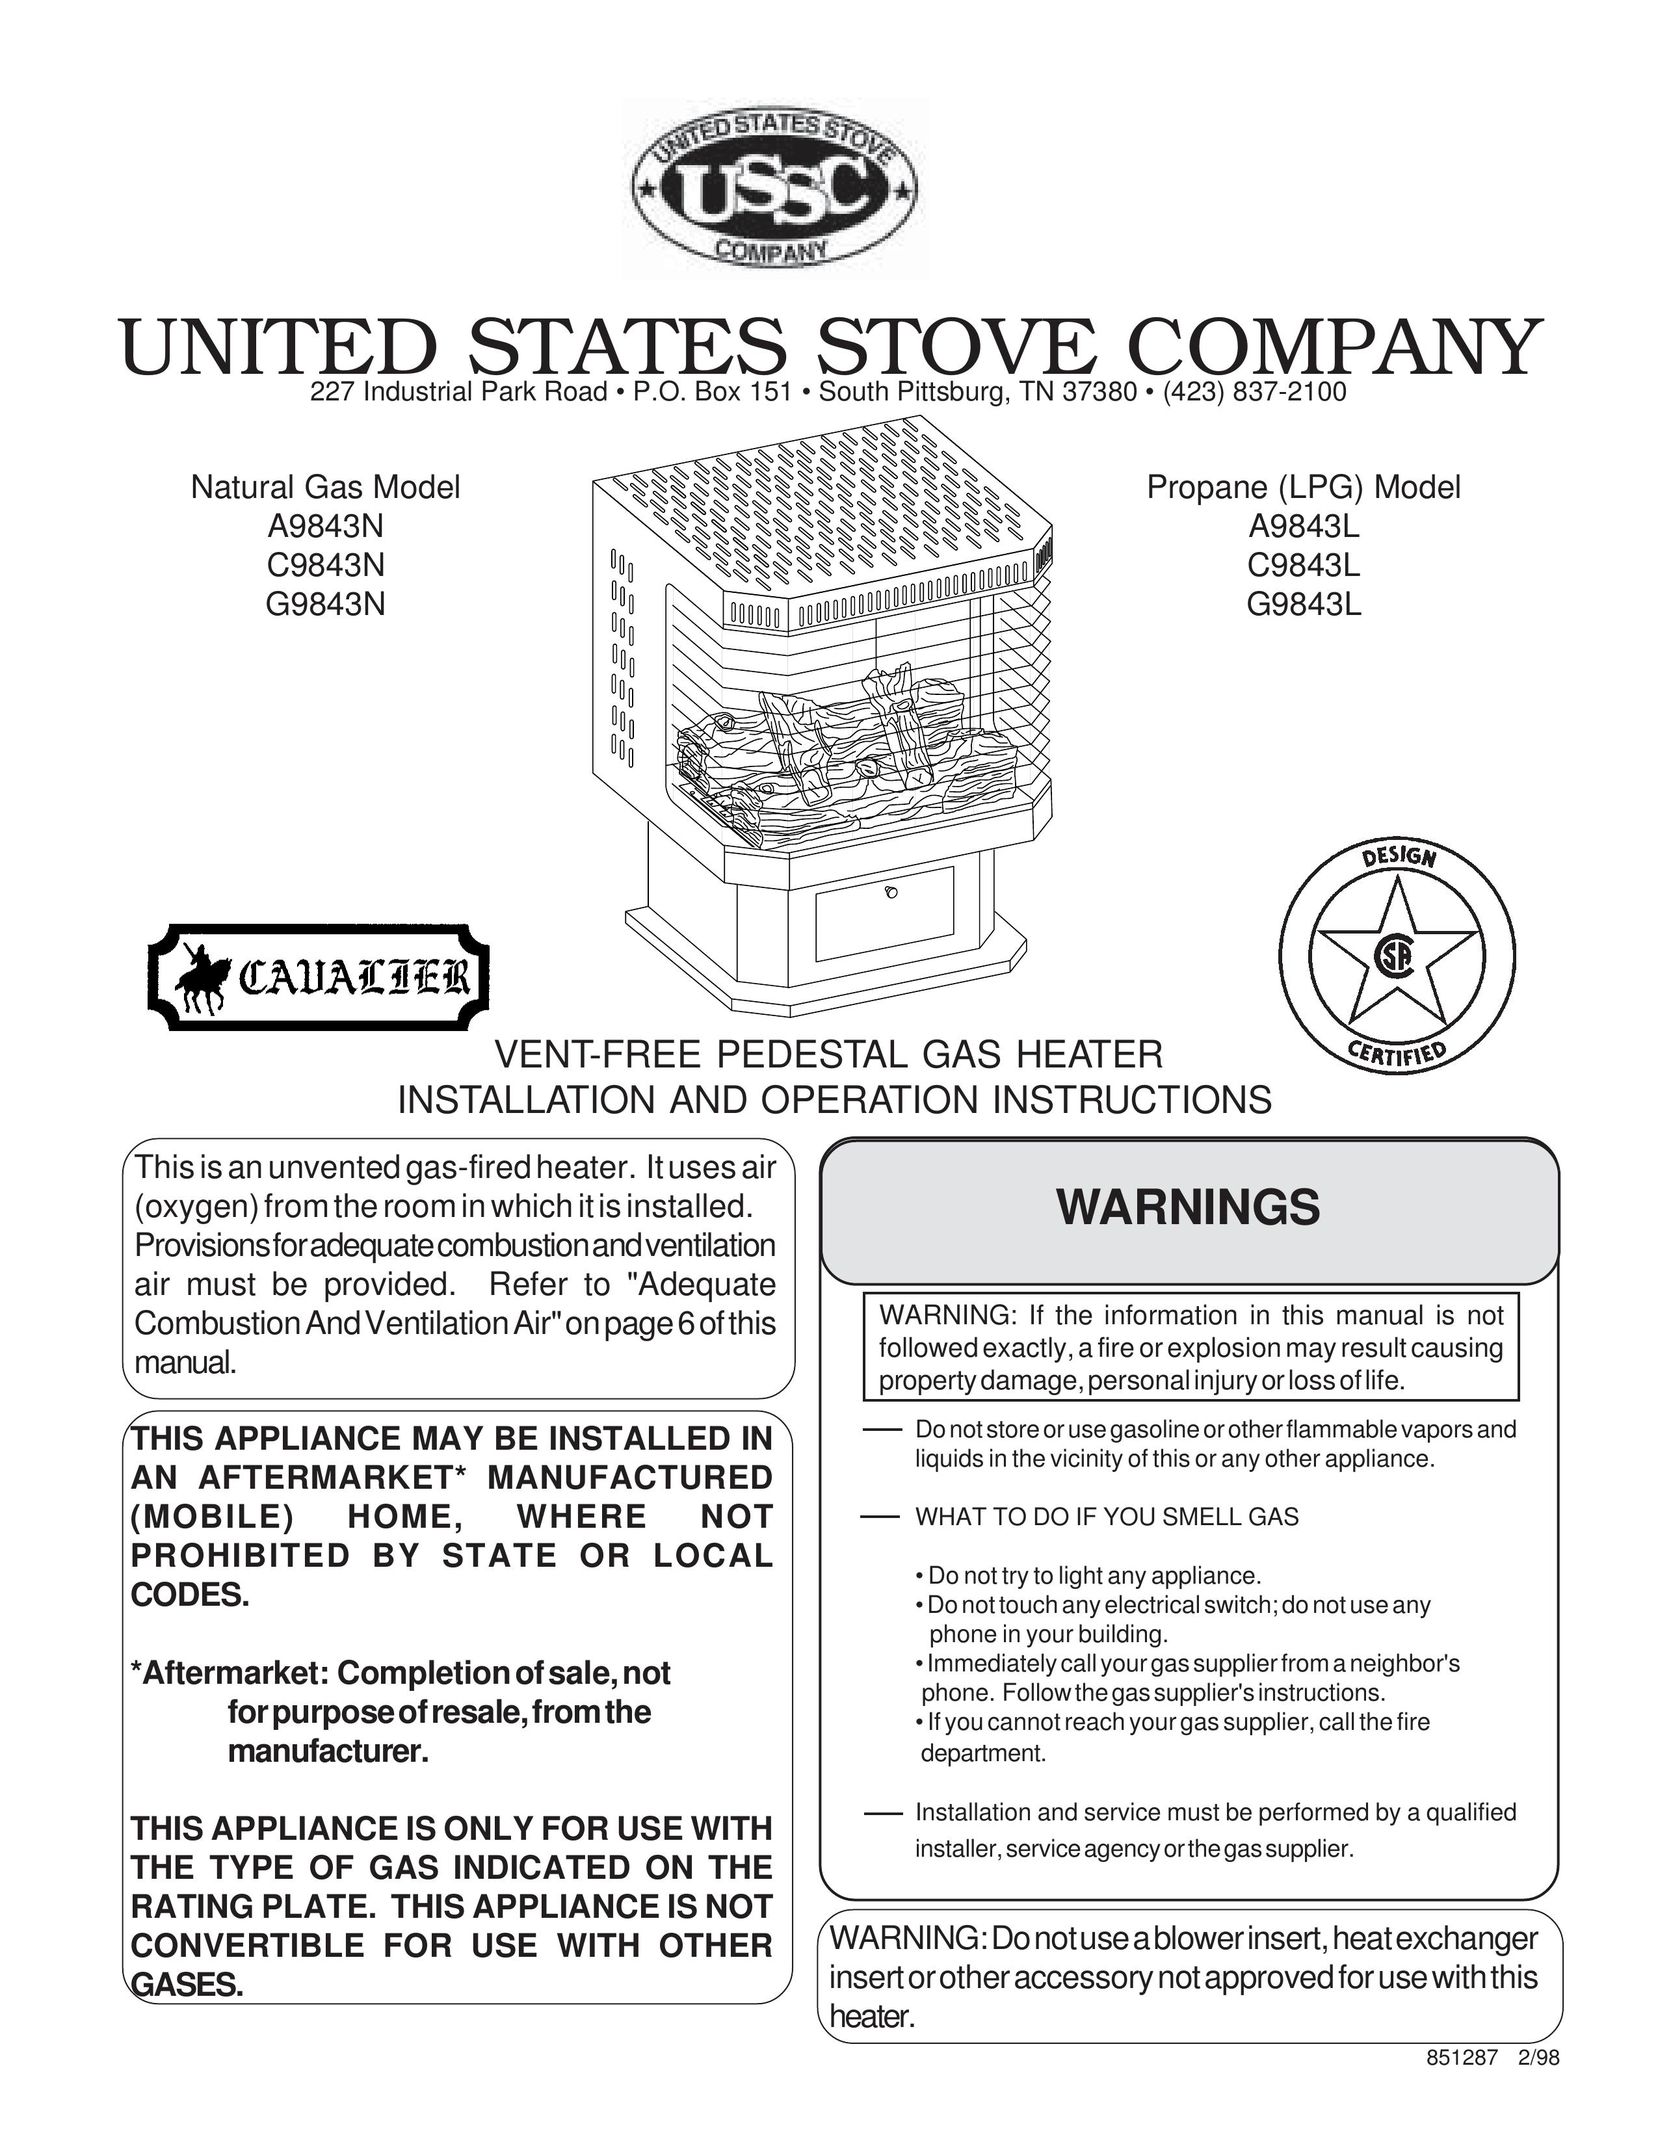 United States Stove G9843L Gas Heater User Manual